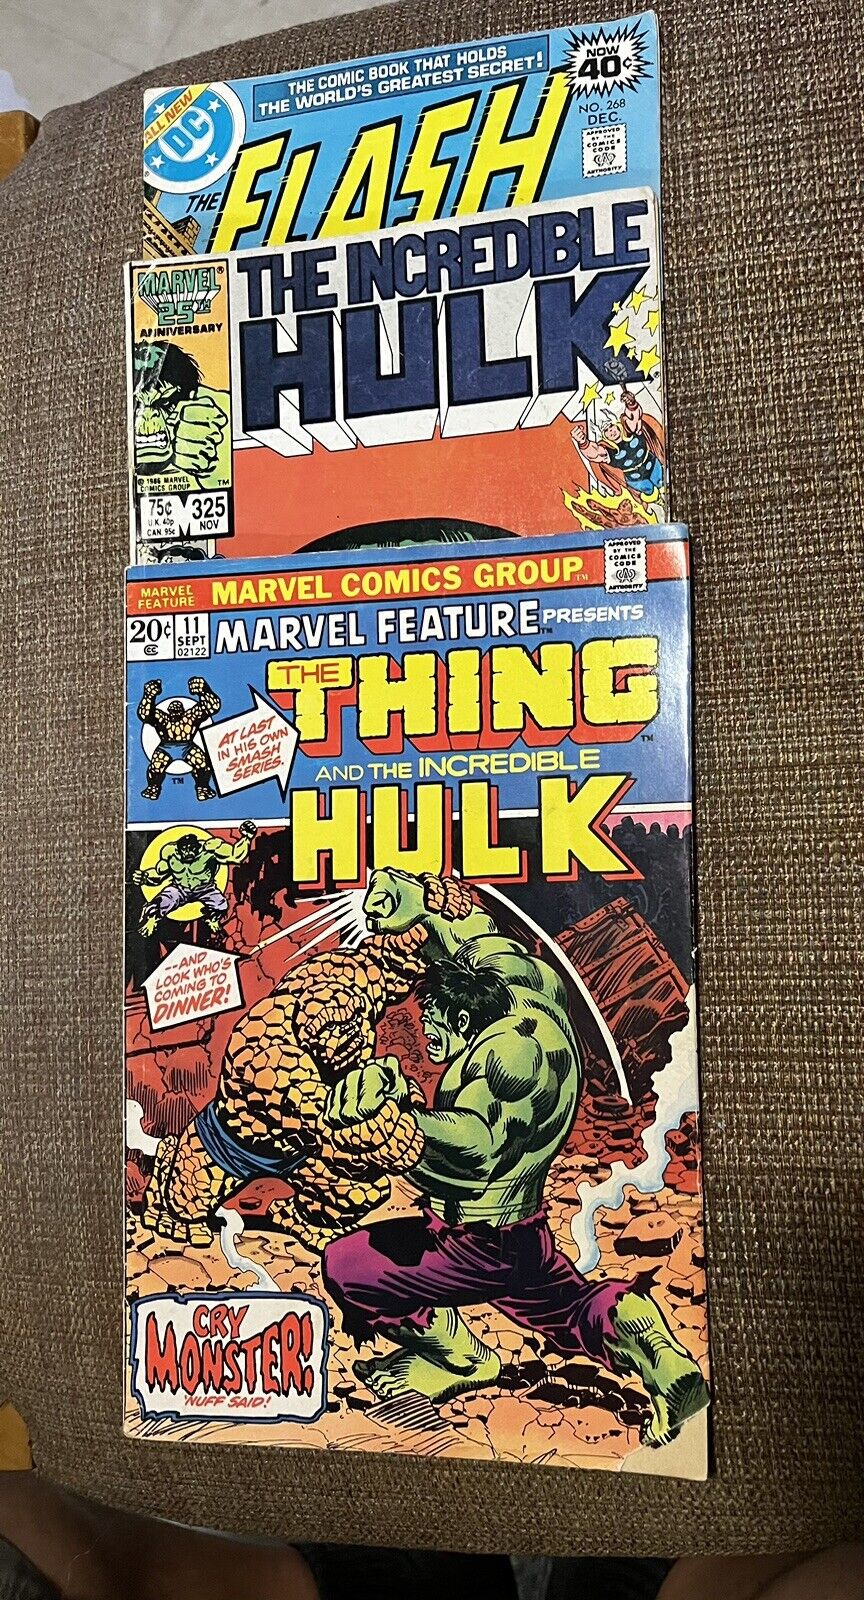 The Thing and The Incredible Hulk #11, The Incredible Hulk #375 & The Flash #268